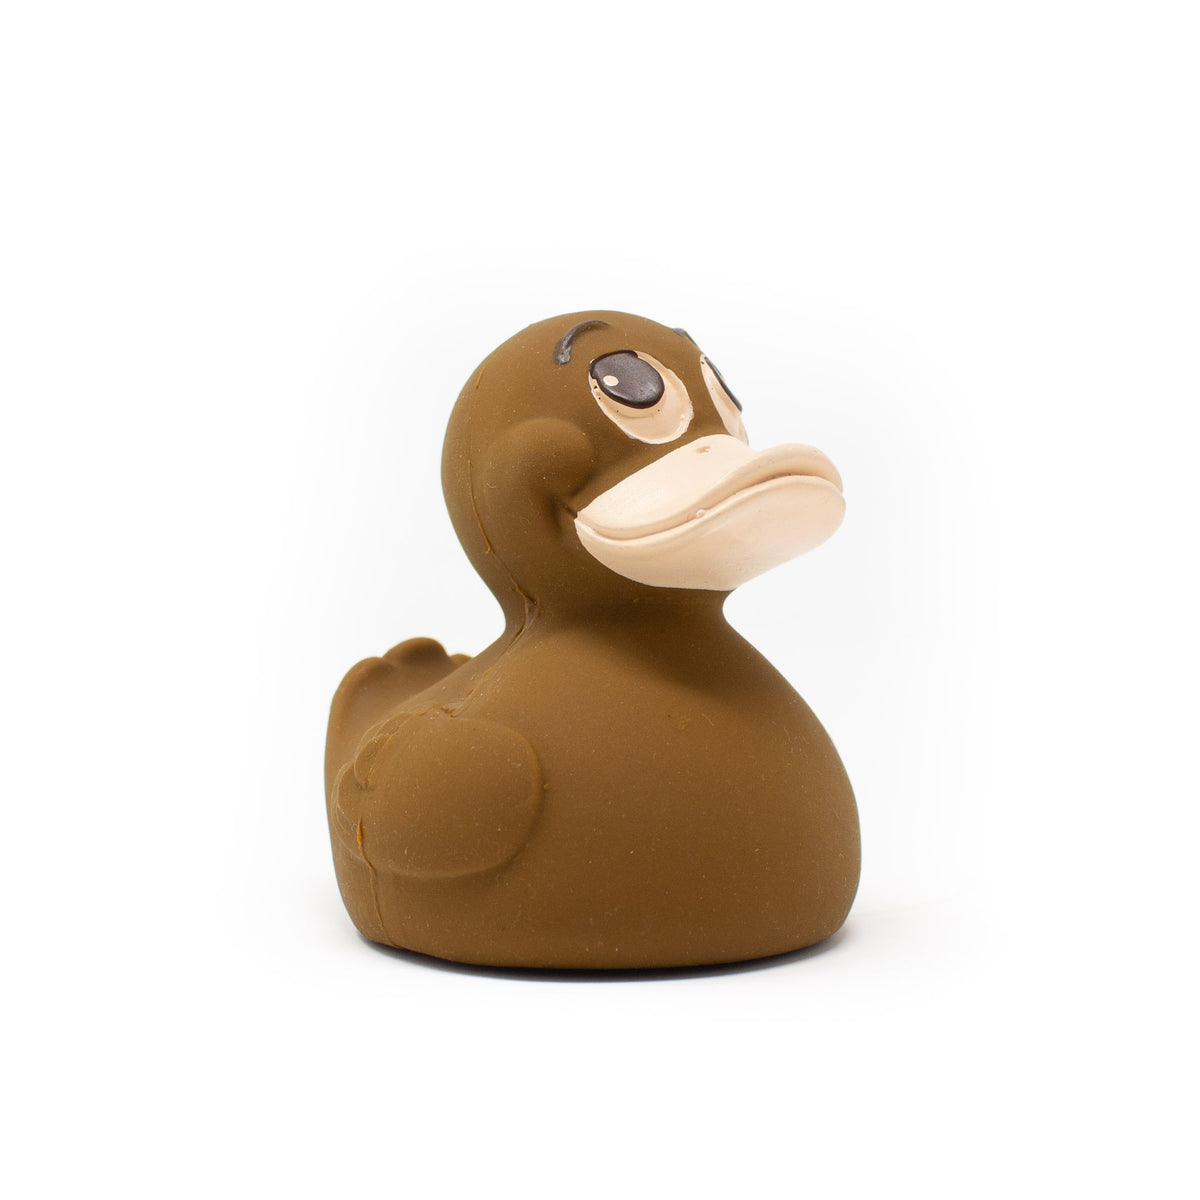 Rubber Duck the Chocolate - Natural Rubber Toys